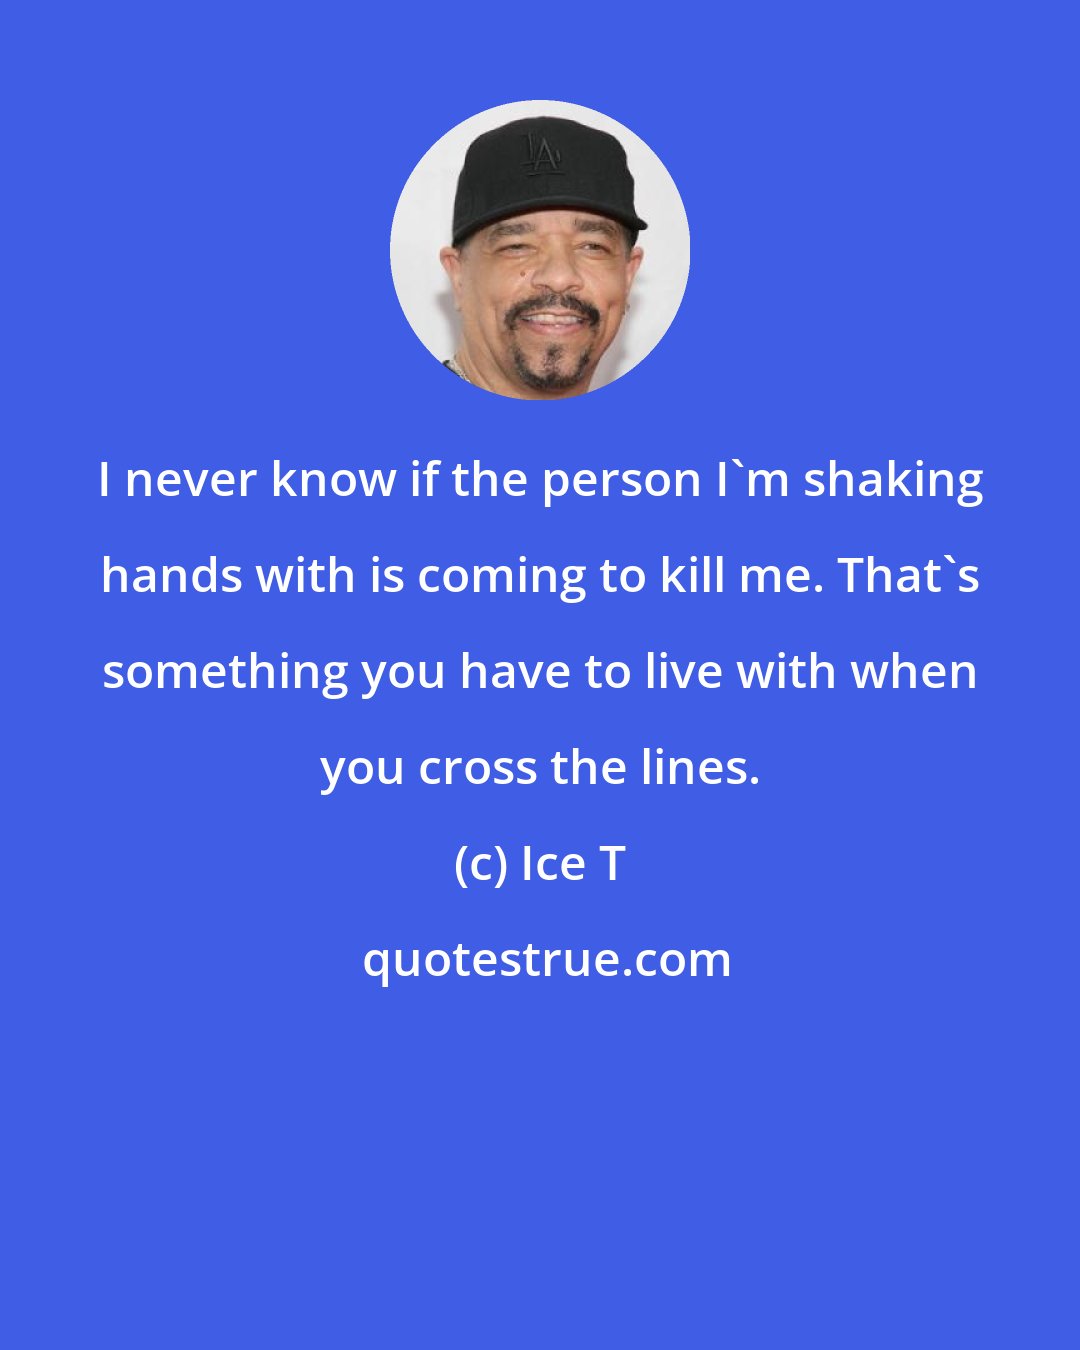 Ice T: I never know if the person I'm shaking hands with is coming to kill me. That's something you have to live with when you cross the lines.